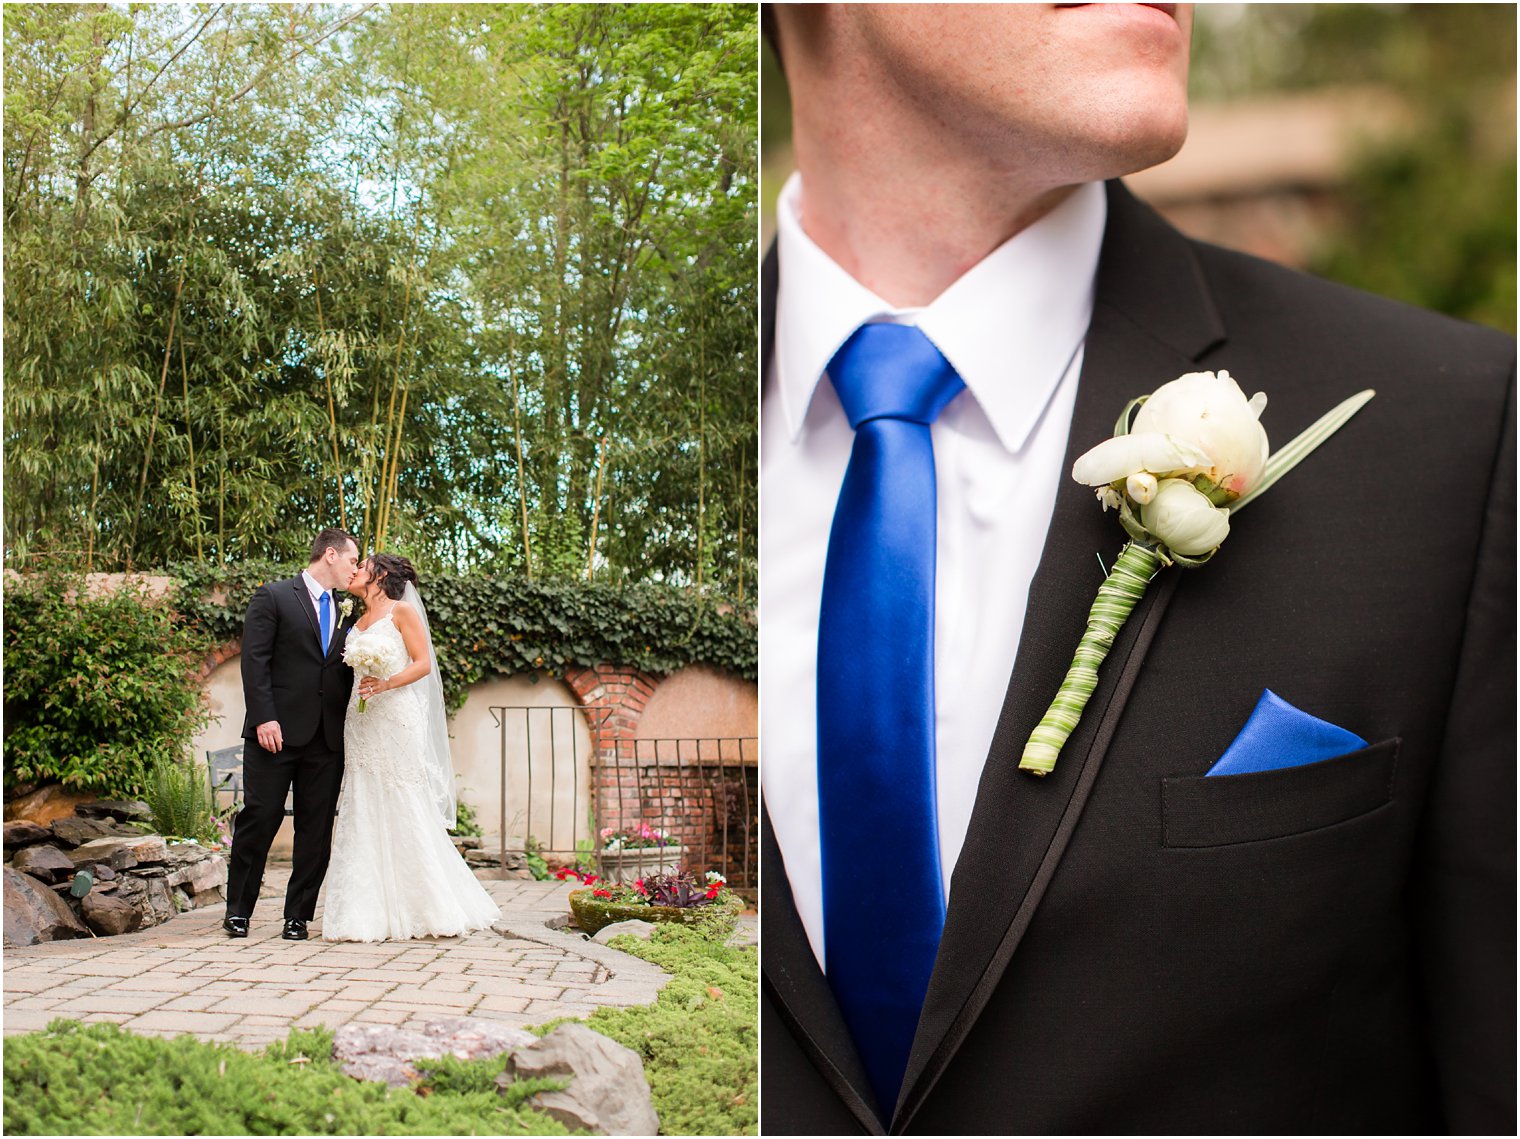 Boutonniere with white florals